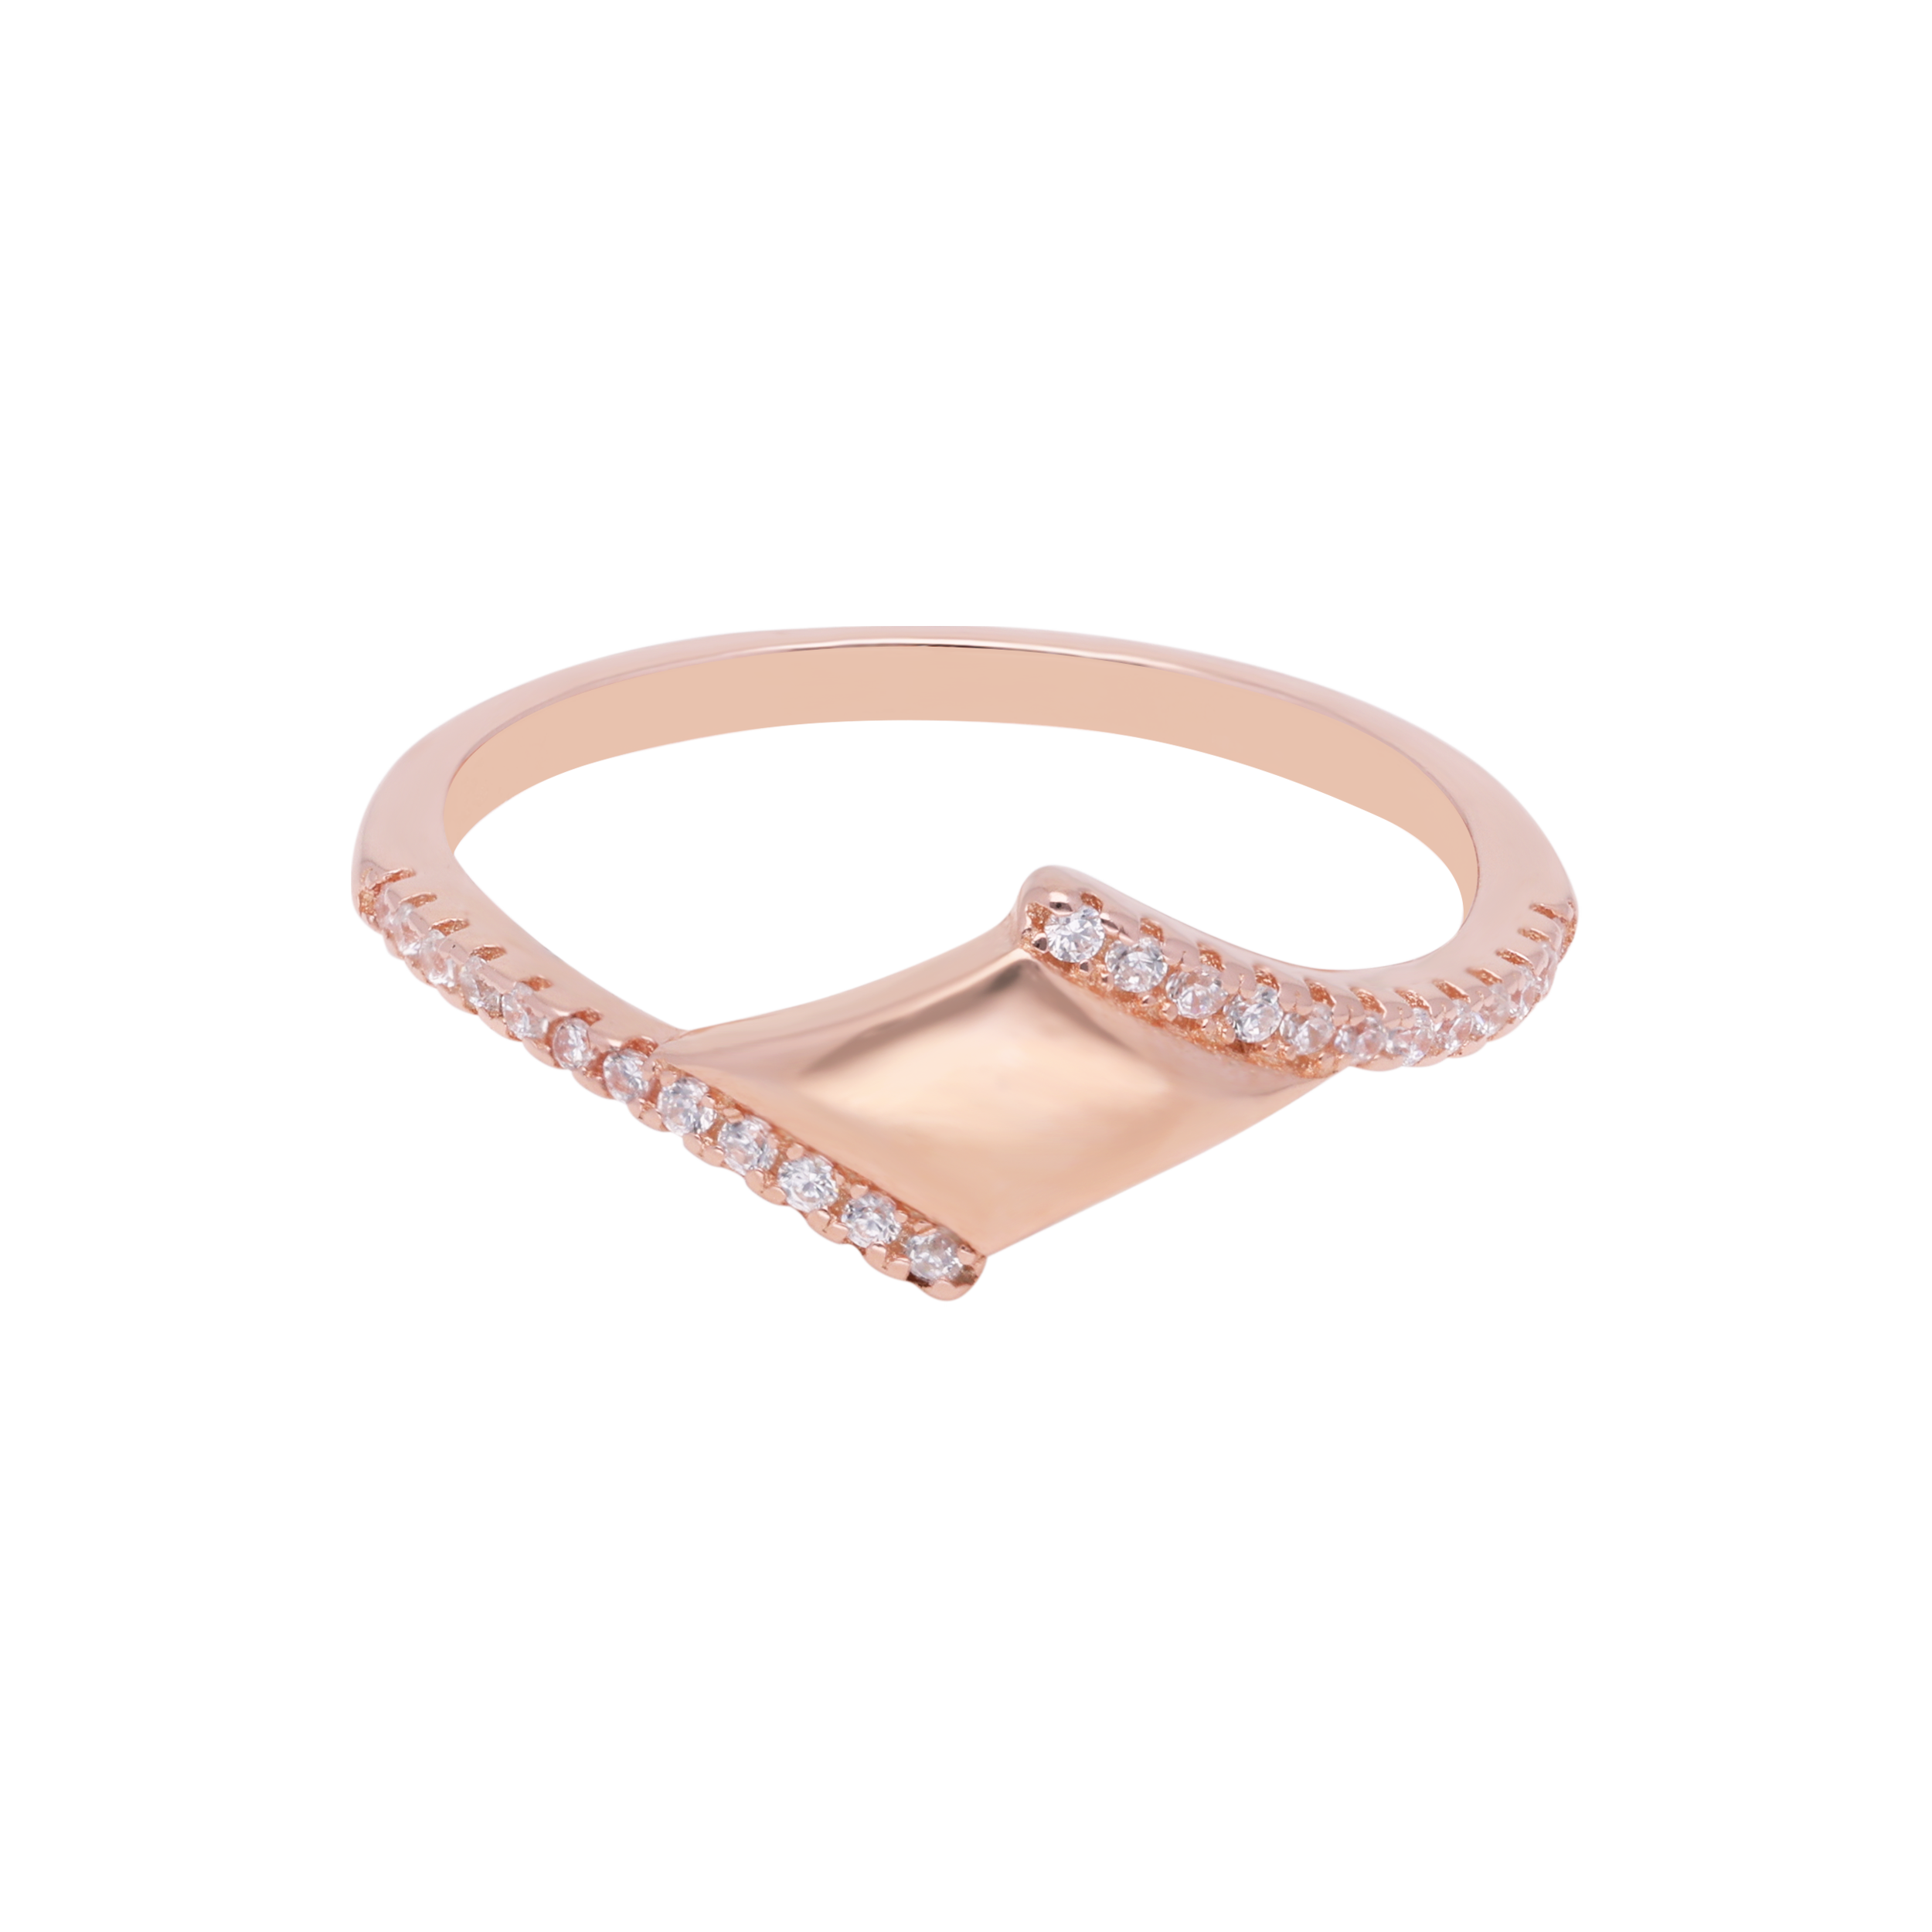 Rosé Radiance: Sterling Silver Band Ring with Rose Gold Accents | SKU : 0019799247, 0019799292, 0019799315, 0019799285, 0019799254, 0019799230, 0019799308, 0019799278, 0019799315, 0019799261